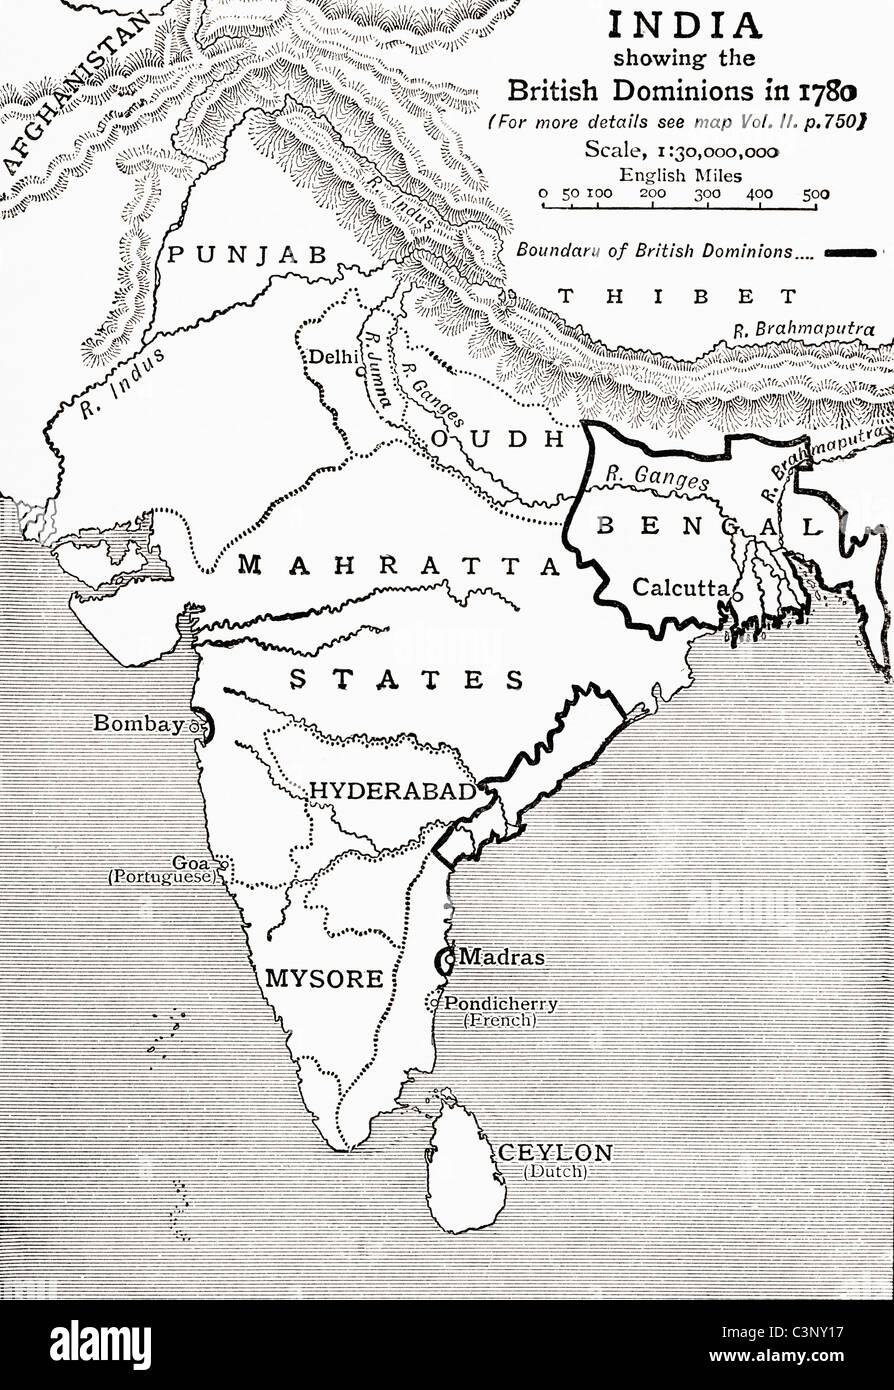 Map of India showing the British Dominions in 1780. From The Story of England, published 1930. Stock Photo